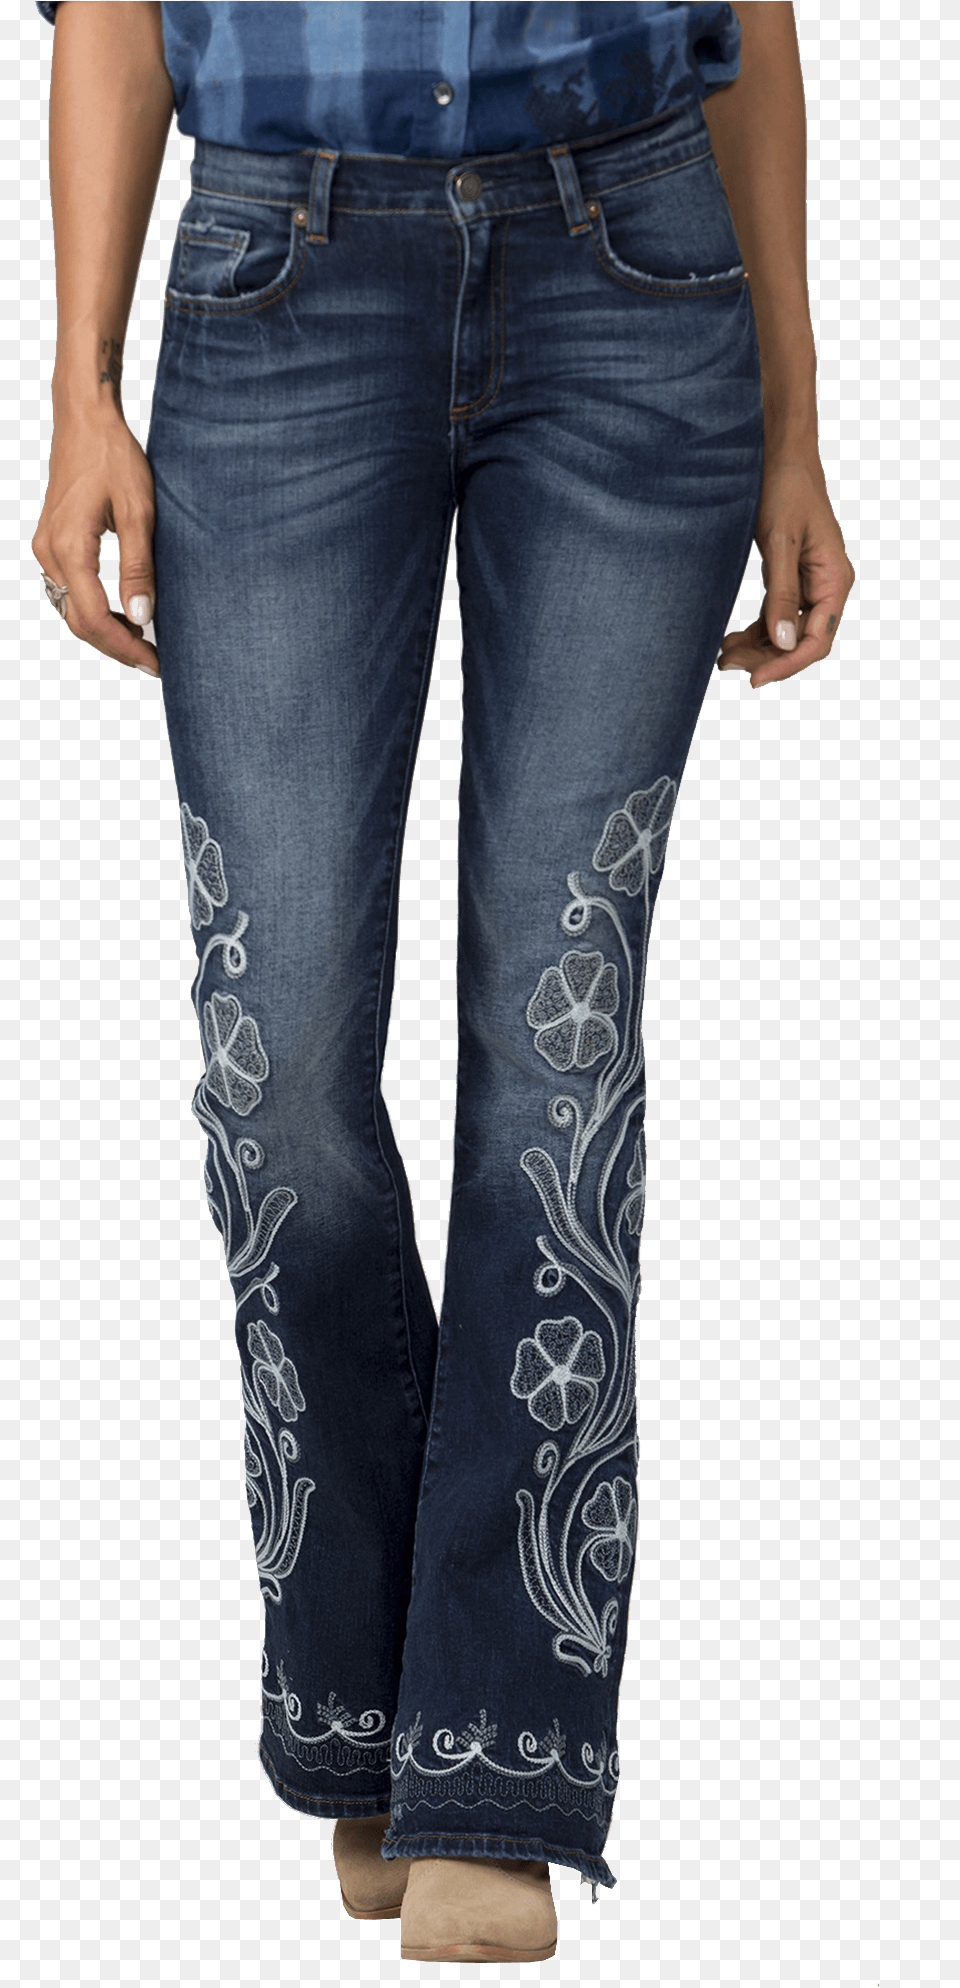 Miss Me Hailey Flare Jean Wfloral Embroidery Pocket, Clothing, Jeans, Pants Png